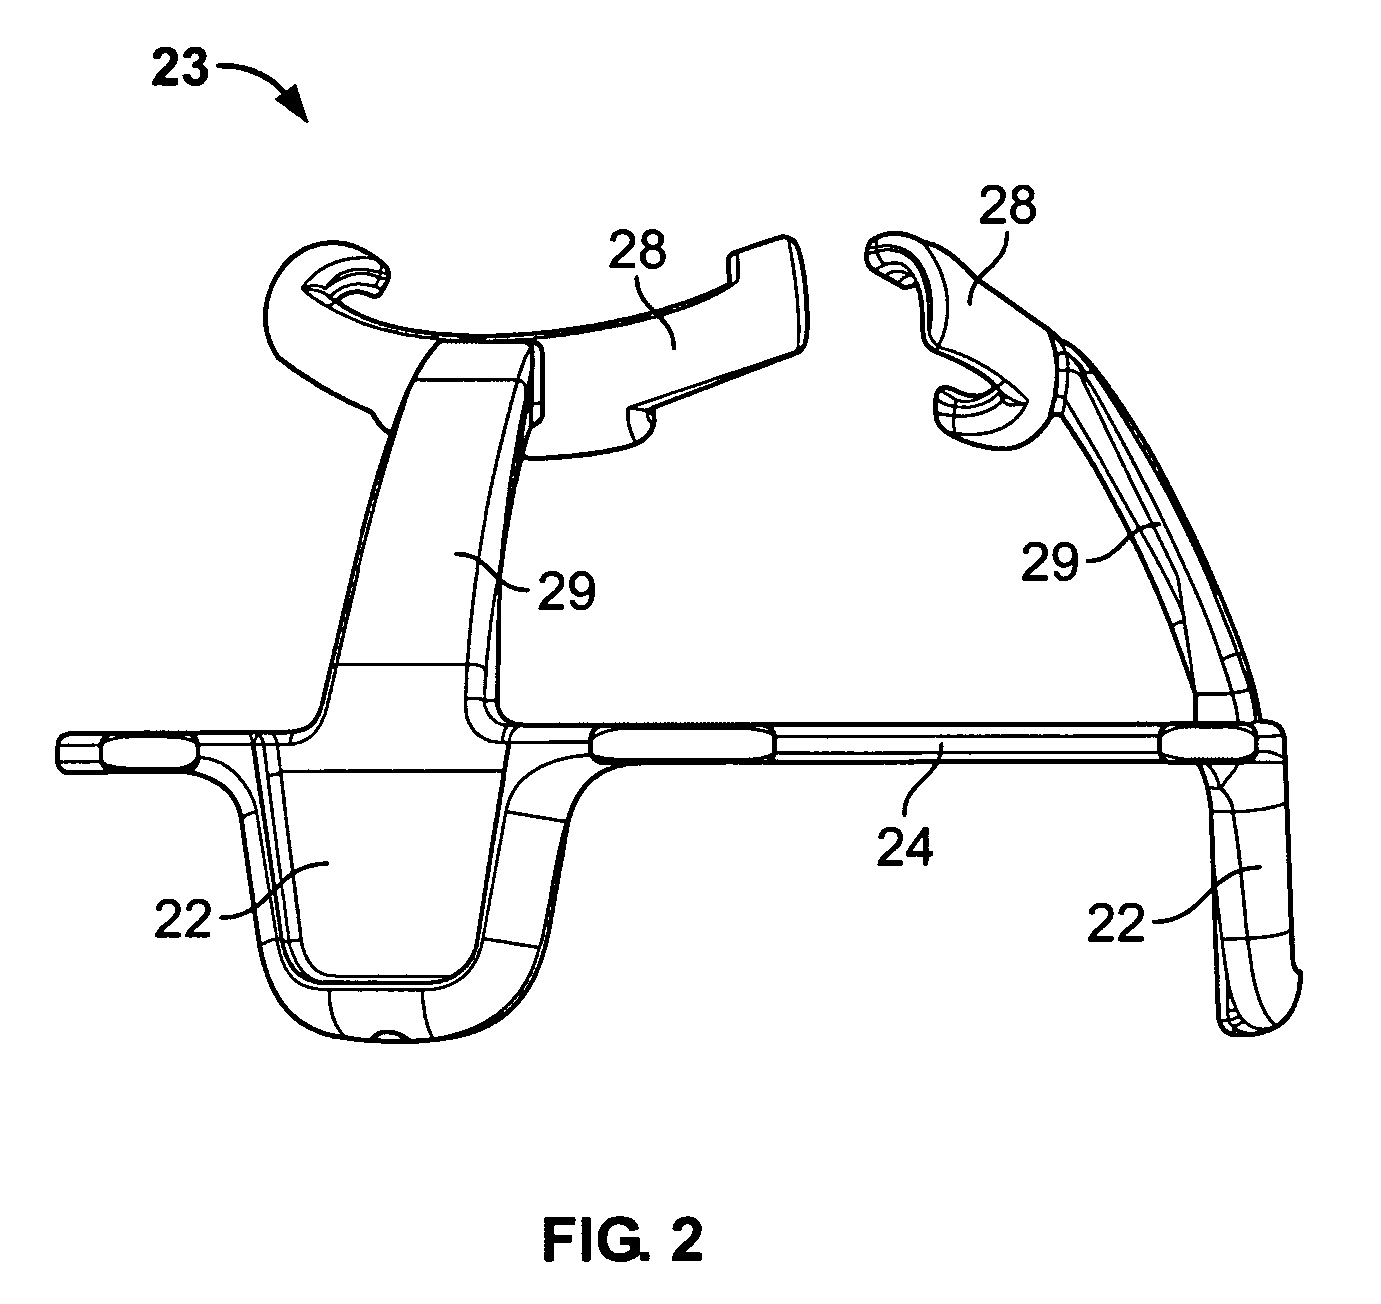 Heart valve support and storing lid system and methods associated therewith